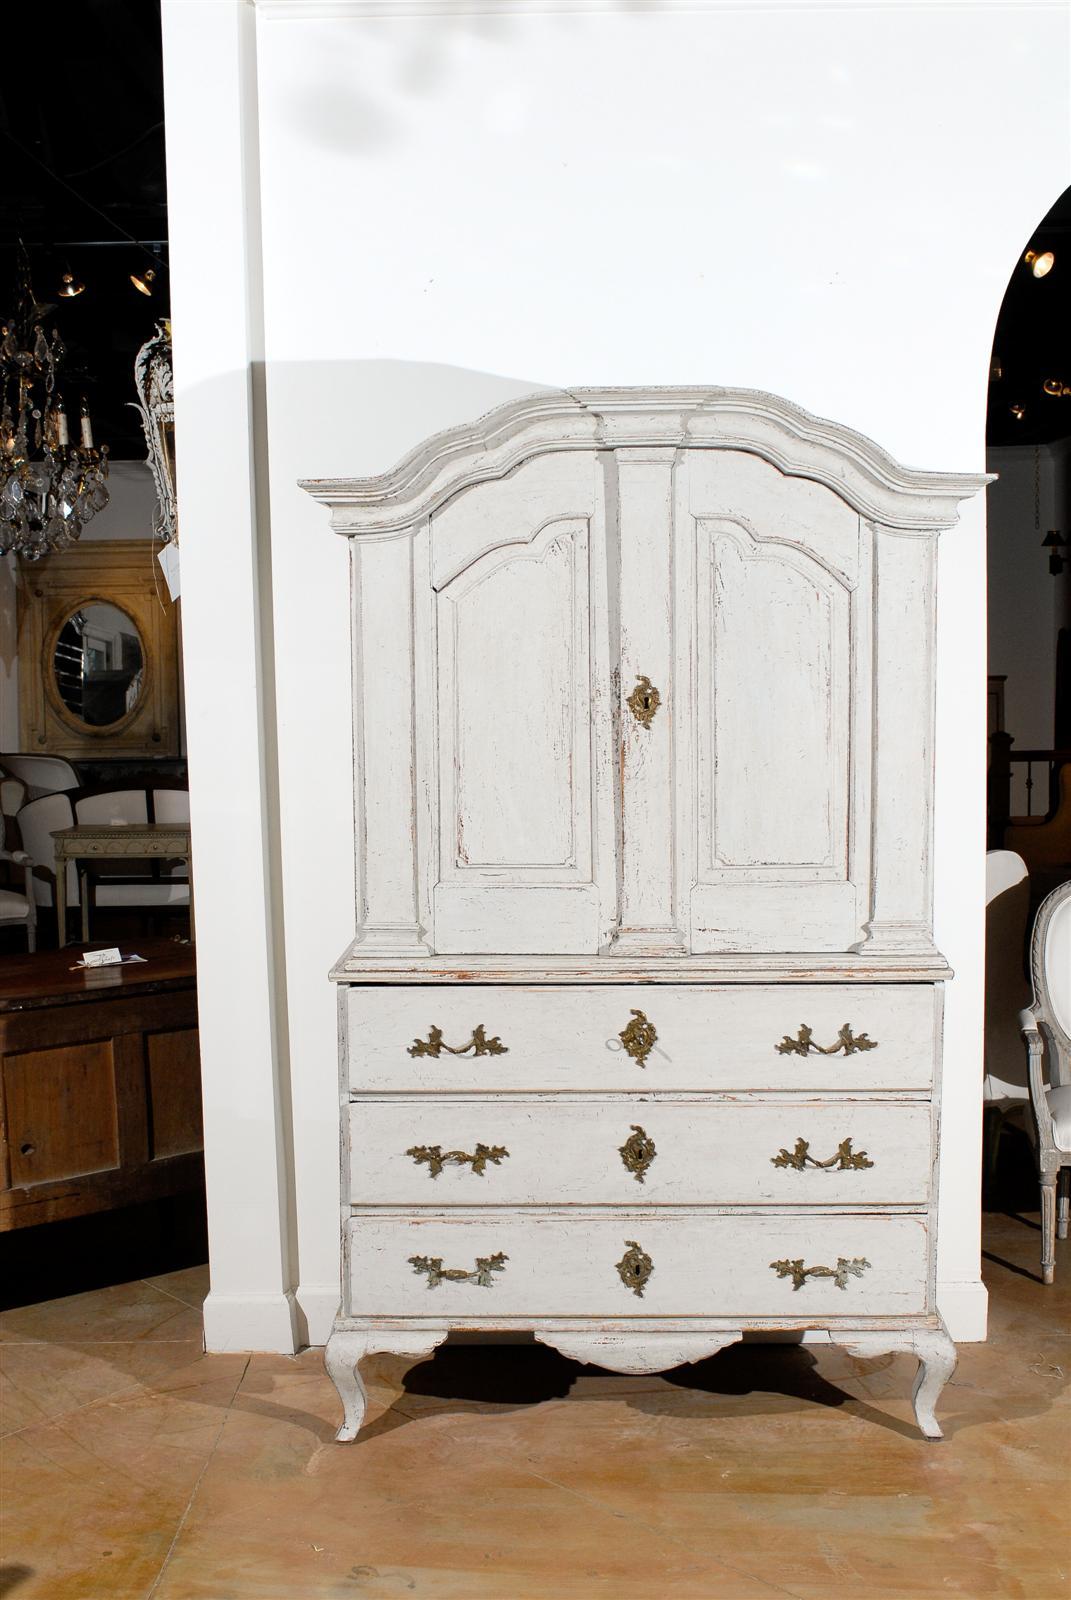 Painted 18th century Swedish linen press with upper cabinet over three drawers, circa 1760.